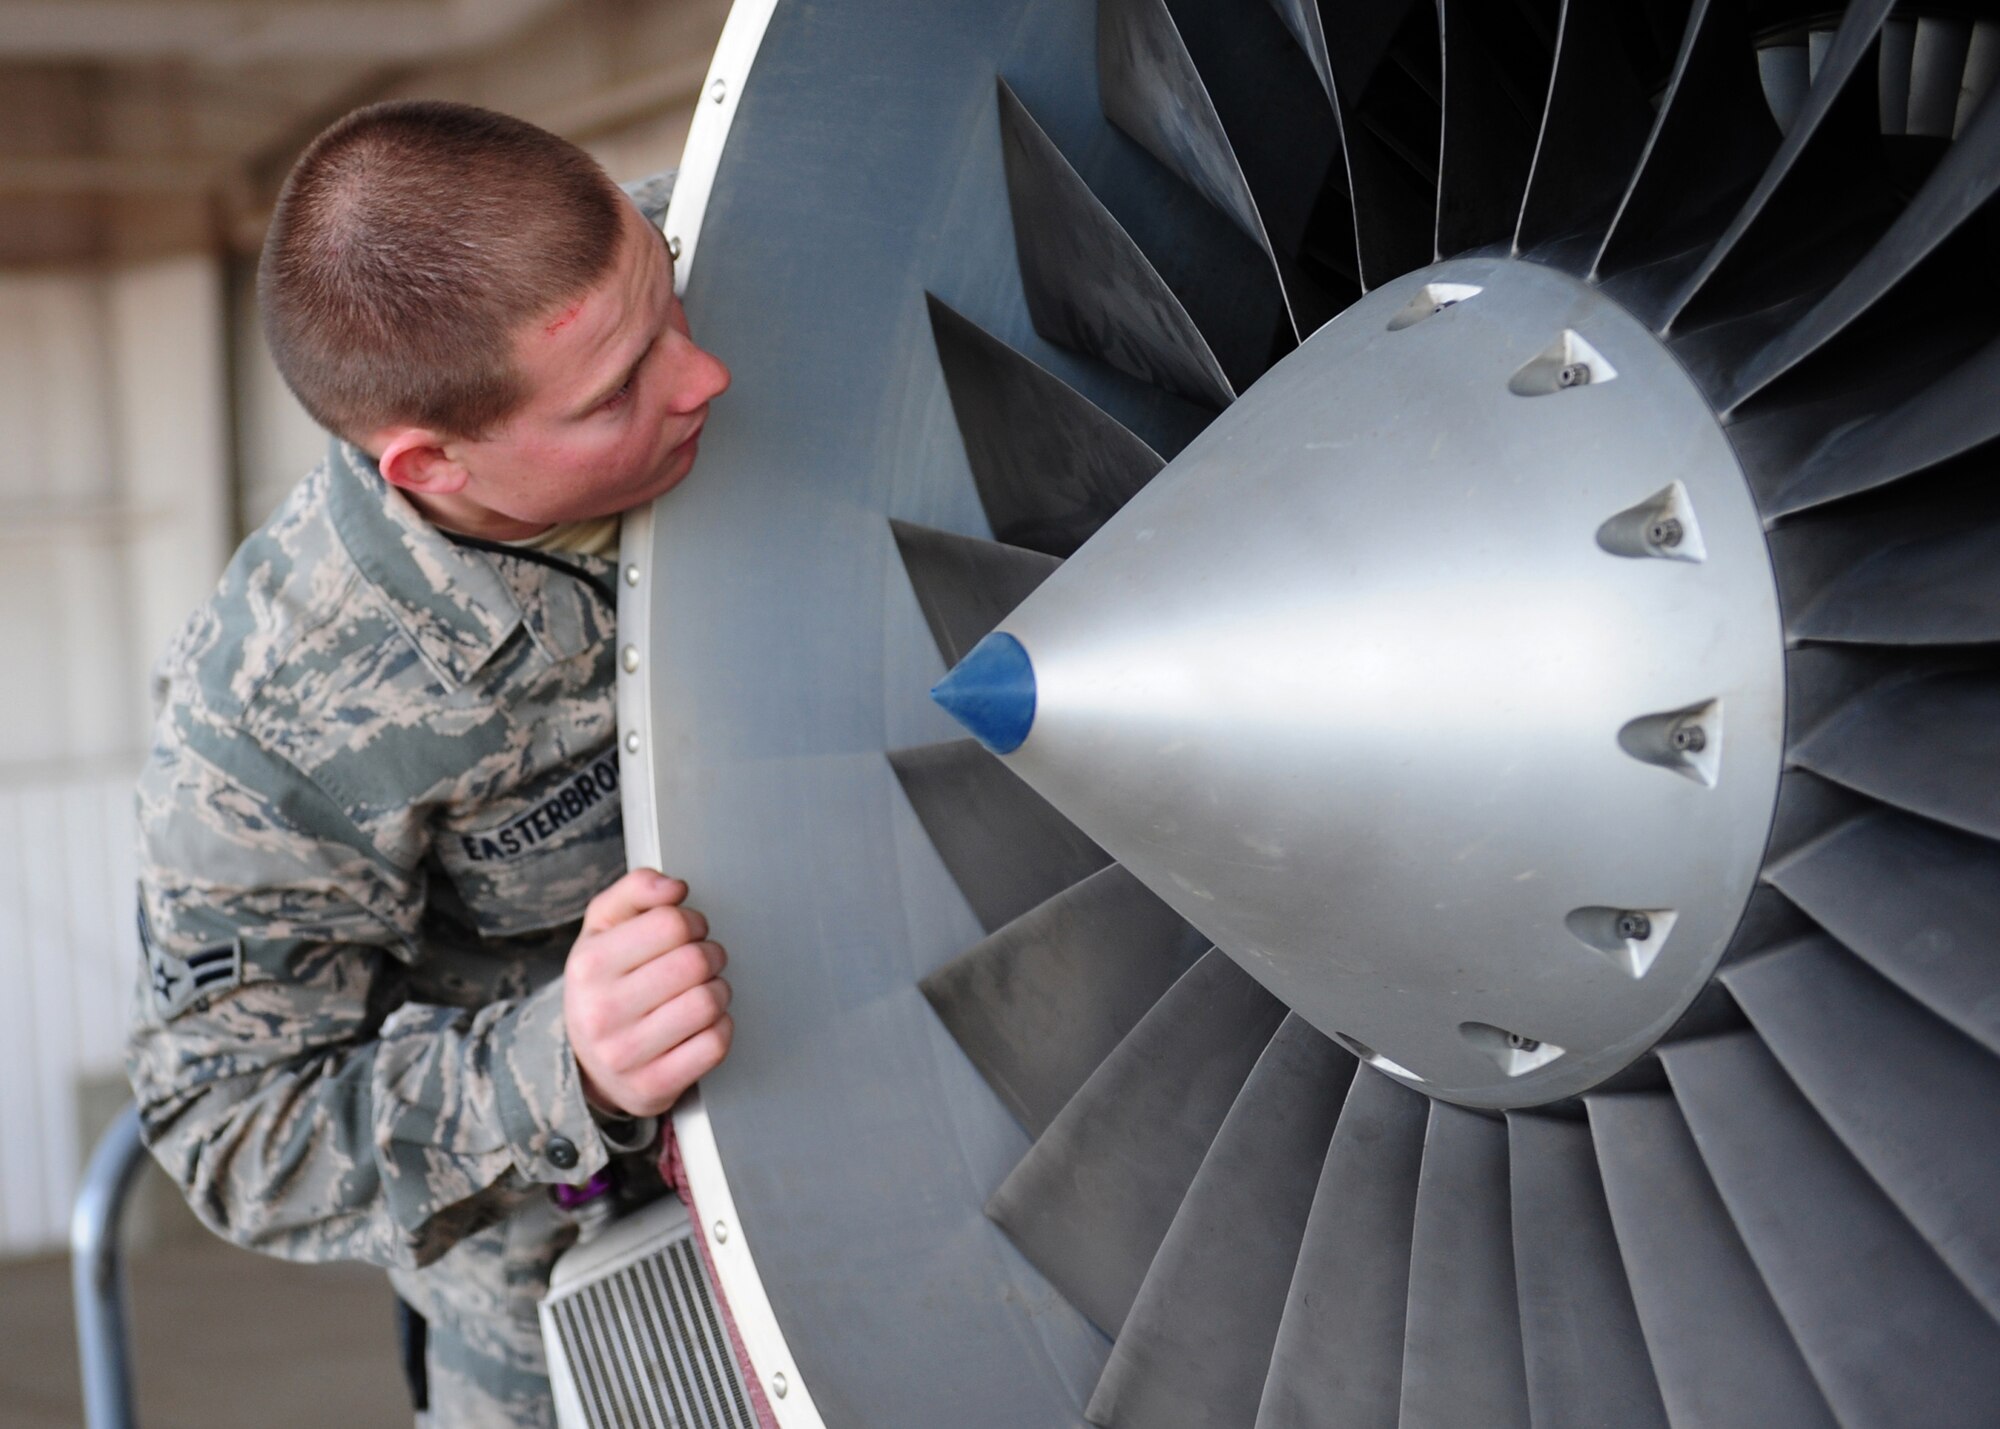 Airman 1st Class Bradley Easterbrook, 9th Aircraft Maintenance Squadron crew chief, checks the turbine blades on an Air Force RQ-4 Global Hawk intelligence, surveillance and reconnaissance aircraft Dec. 19, 2012, at Beale Air Force Base, Calif. Airmen check for foreign objects that can damage internal parts before re-assembling the aircraft during maintenance. (U.S. Air Force photo by Senior Airman Shawn Nickel/Released)